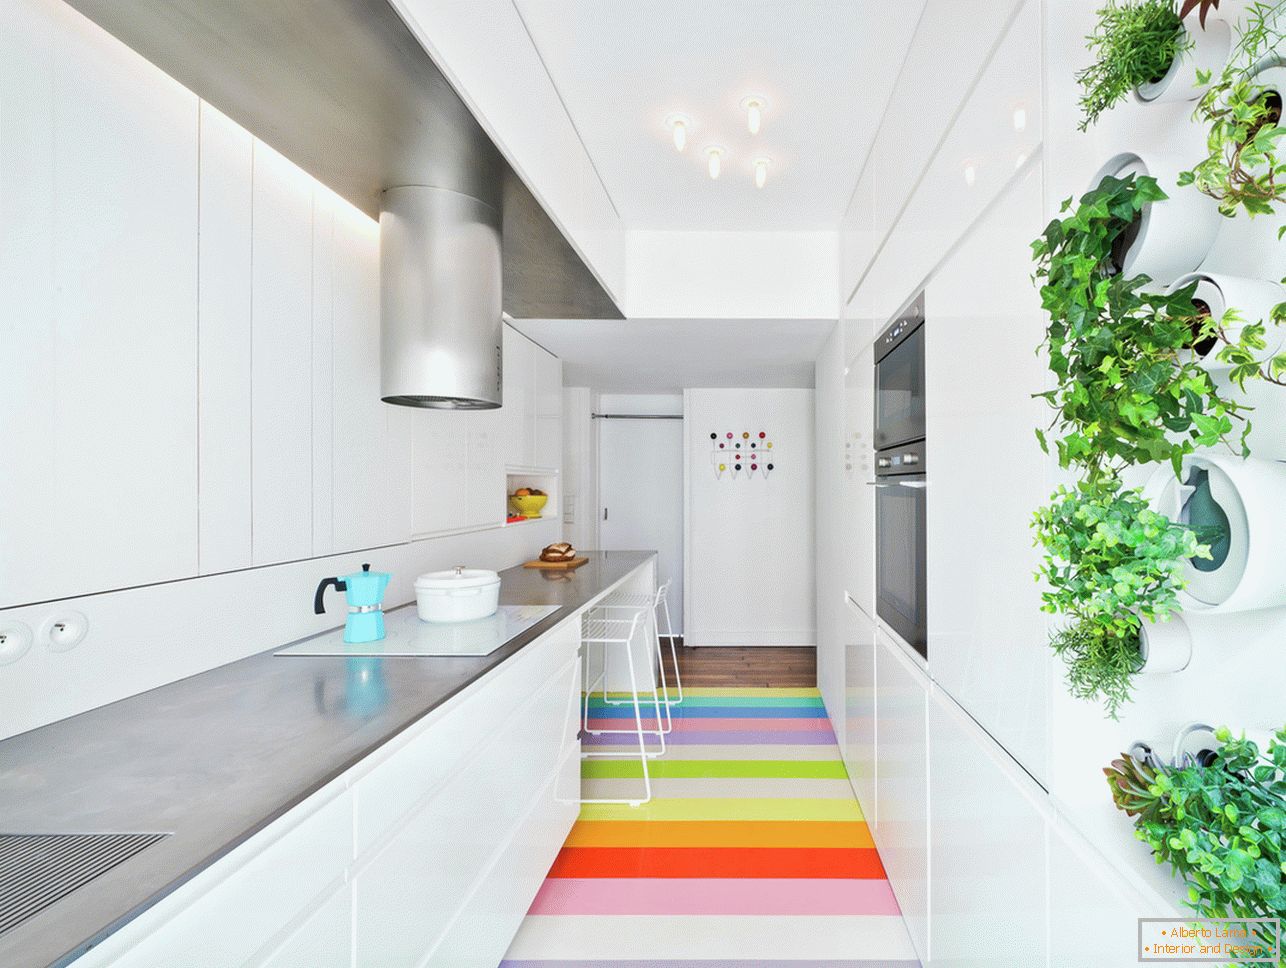 Bright accents in the interior of the kitchen